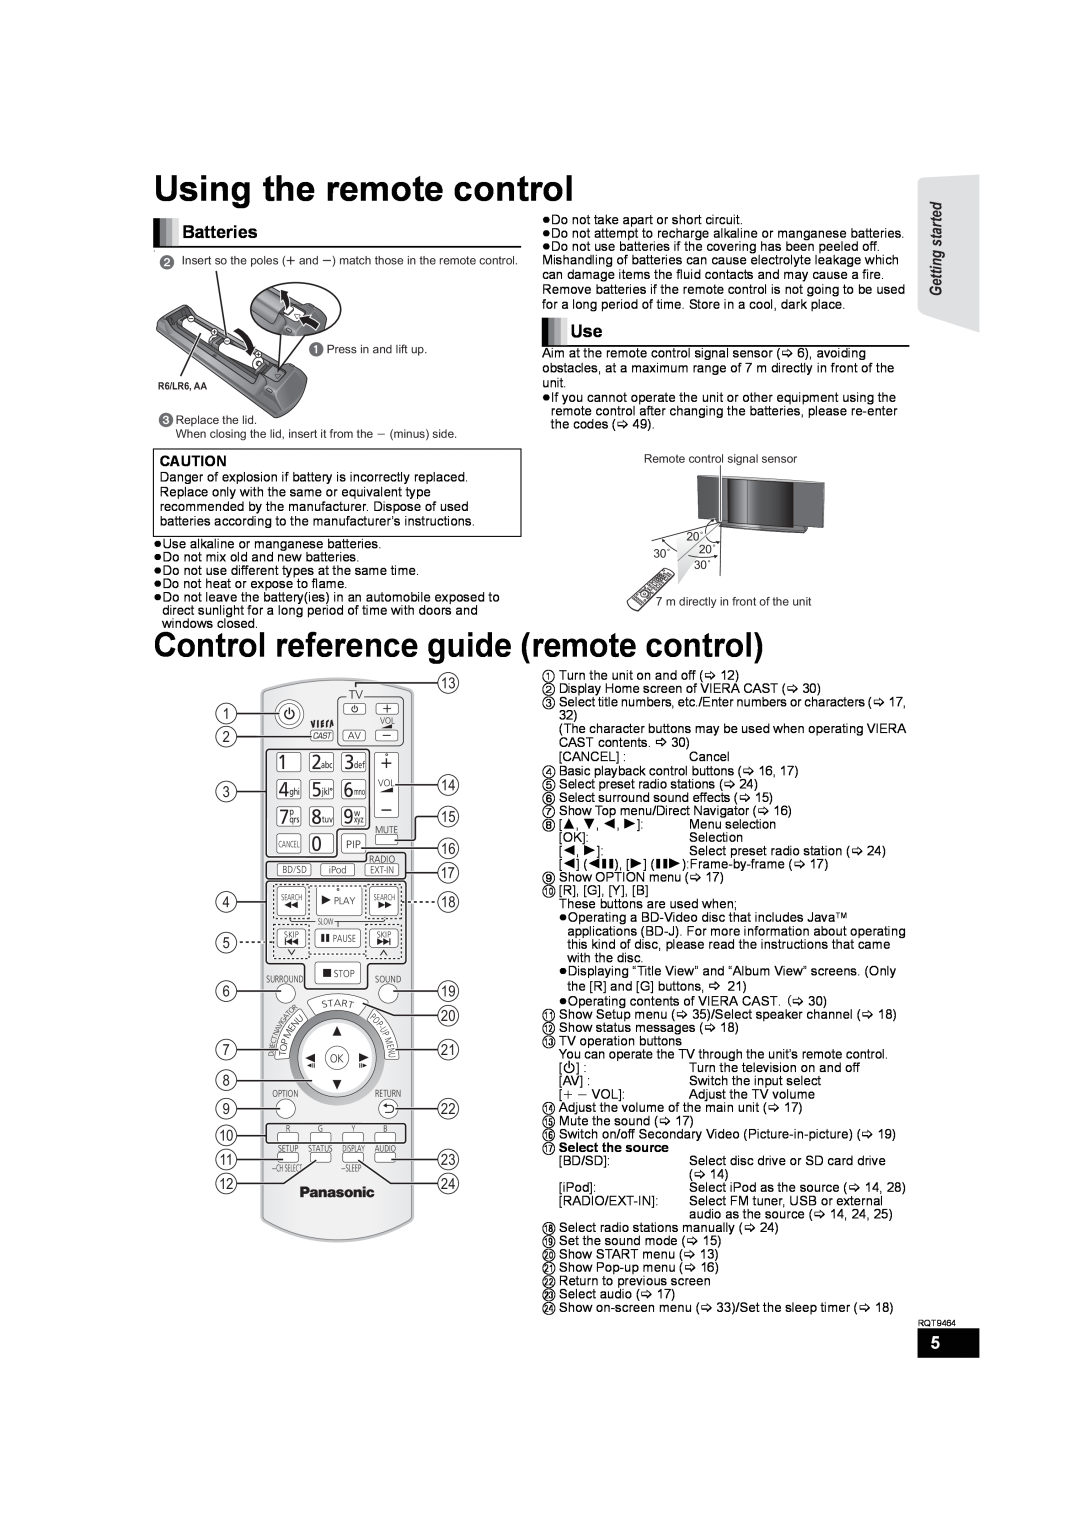 Panasonic SC-BTX70 manual Using the remote control, Control reference guide remote control, Batteries 